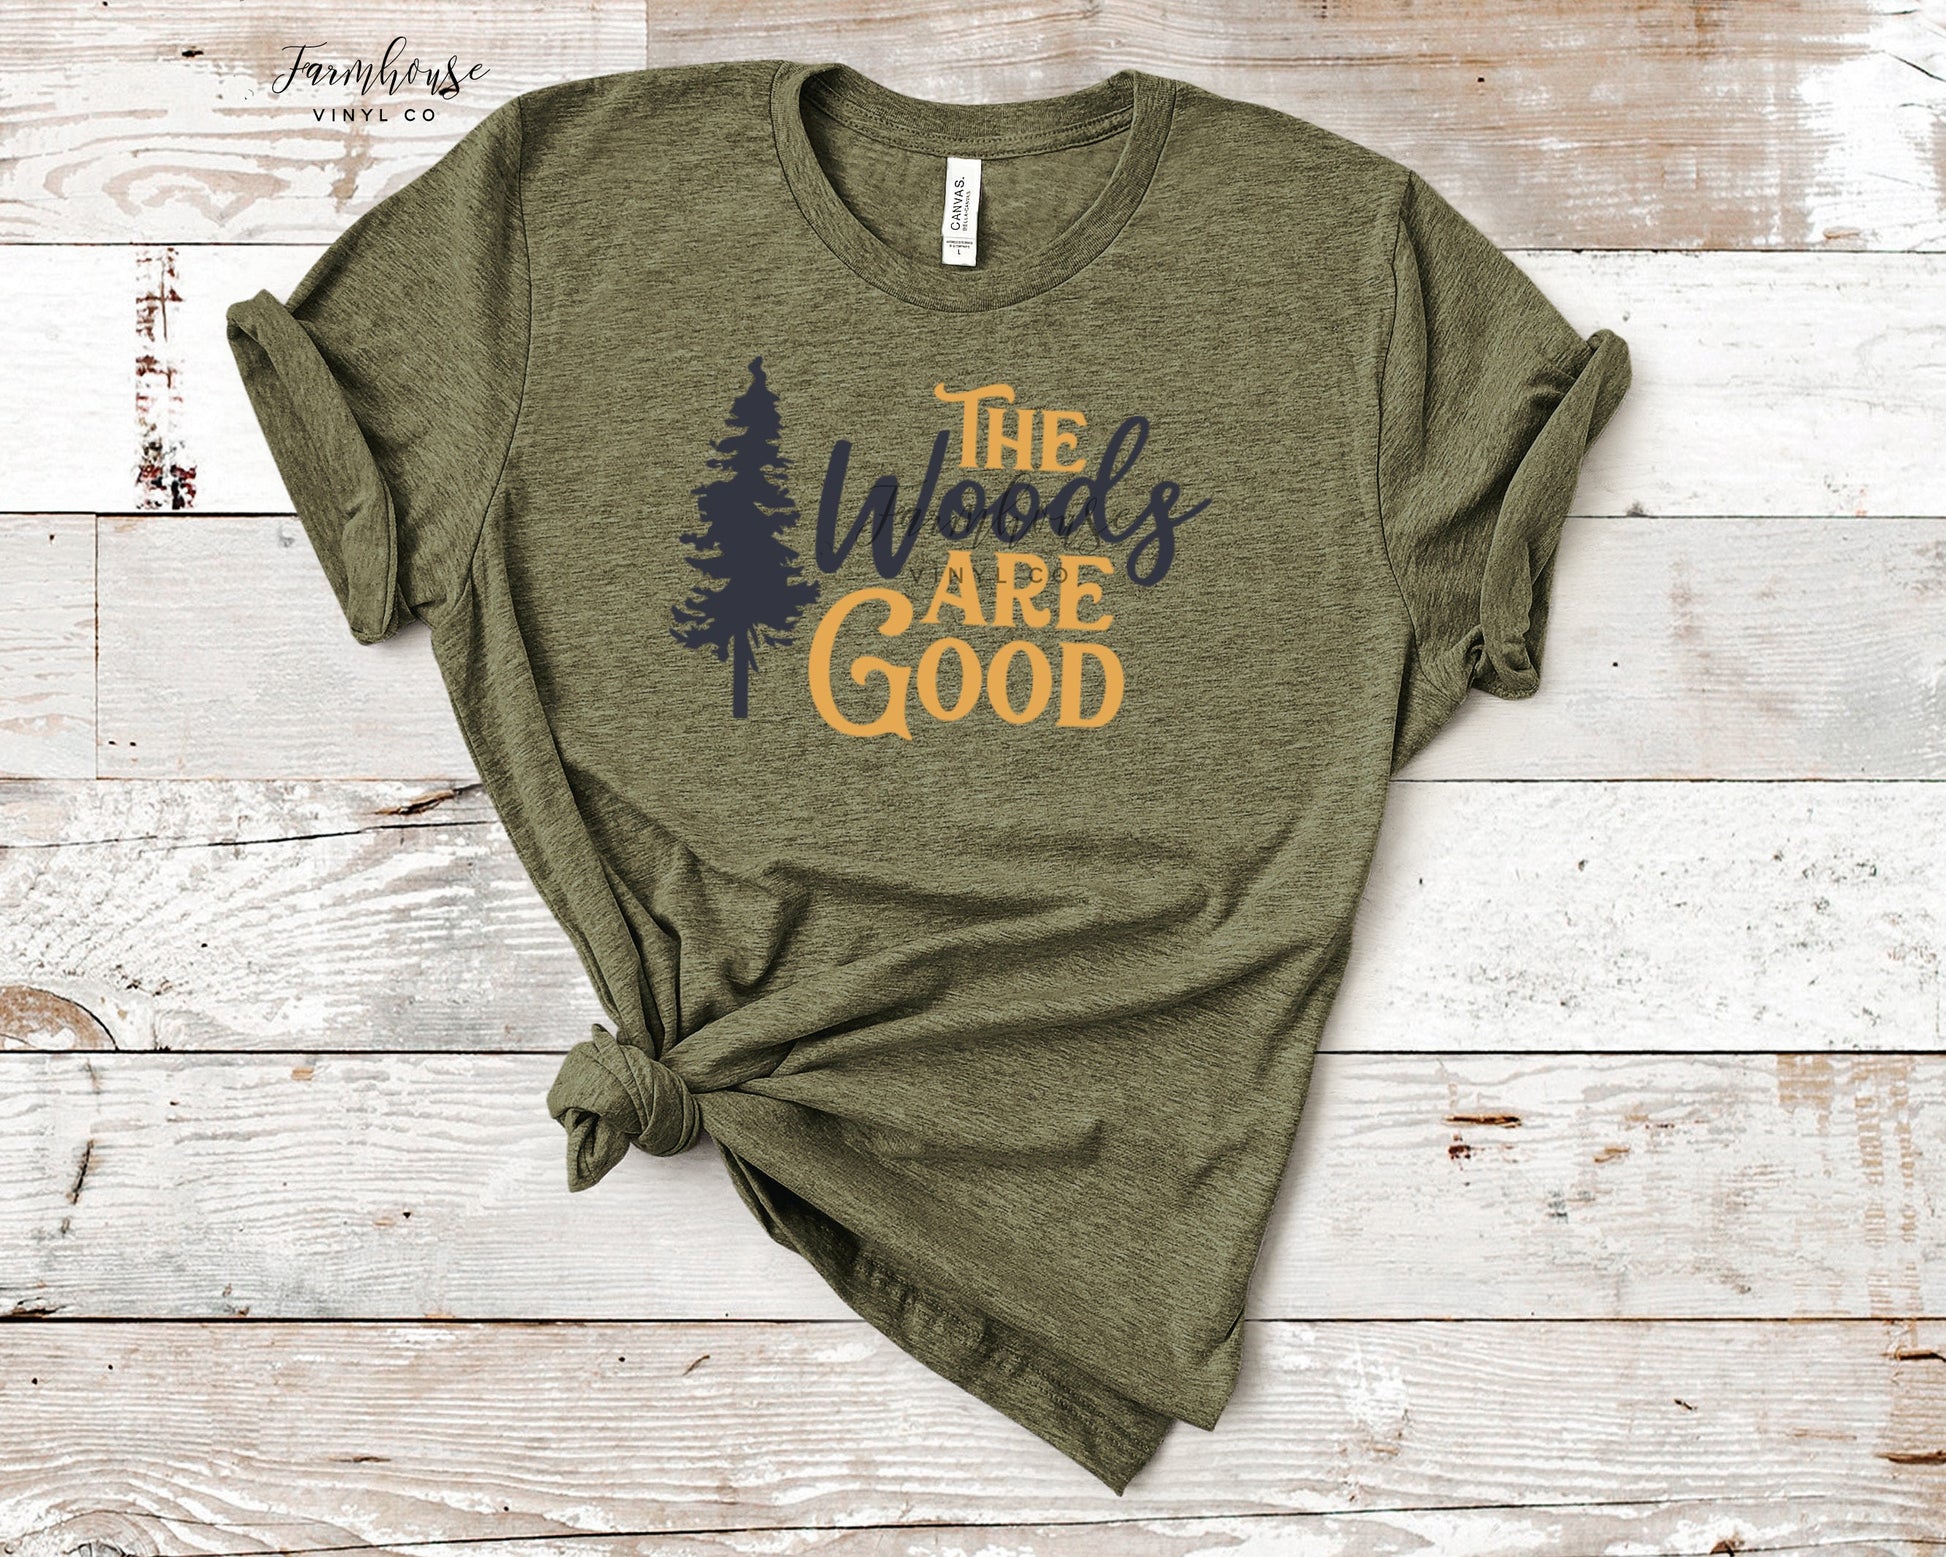 The Woods are Good Outdoor Hiking Camping Unisex Shirt / Camping Shirt / Hiking Gear / Mens Shirts / Outdoor Explorer / Get Outside Tees - Farmhouse Vinyl Co